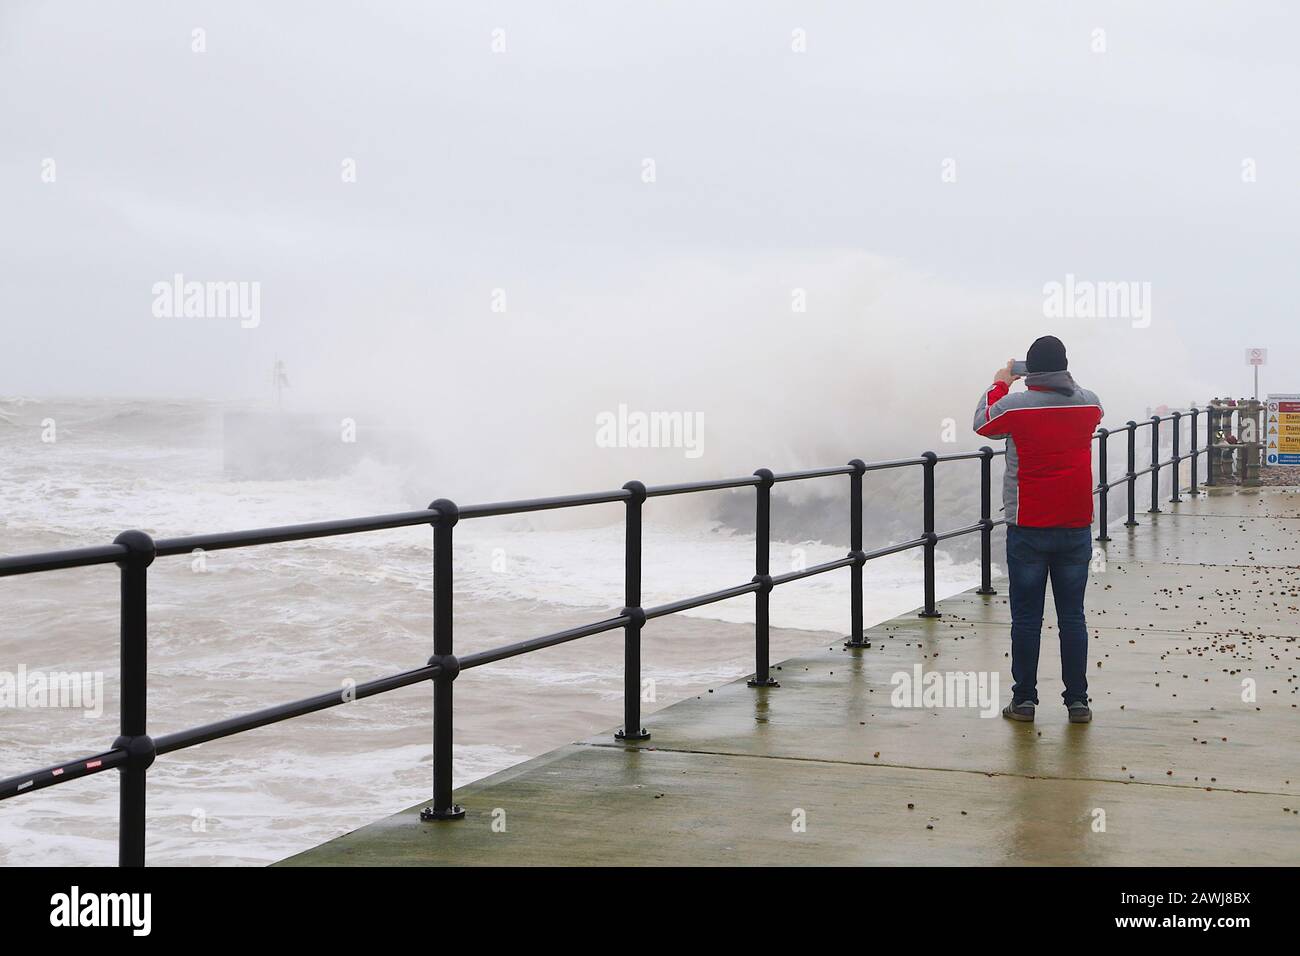 Hastings, East Sussex, UK. 09 Feb, 2020. UK Weather: The Met office has issued an amber warning for wind in the South with predicted winds of 75mph as Gale force winds and rain hit the South East coast in Hastings, East Sussex. ©Paul Lawrenson 2019, Photo Credit: Paul Lawrenson/Alamy Live News Stock Photo